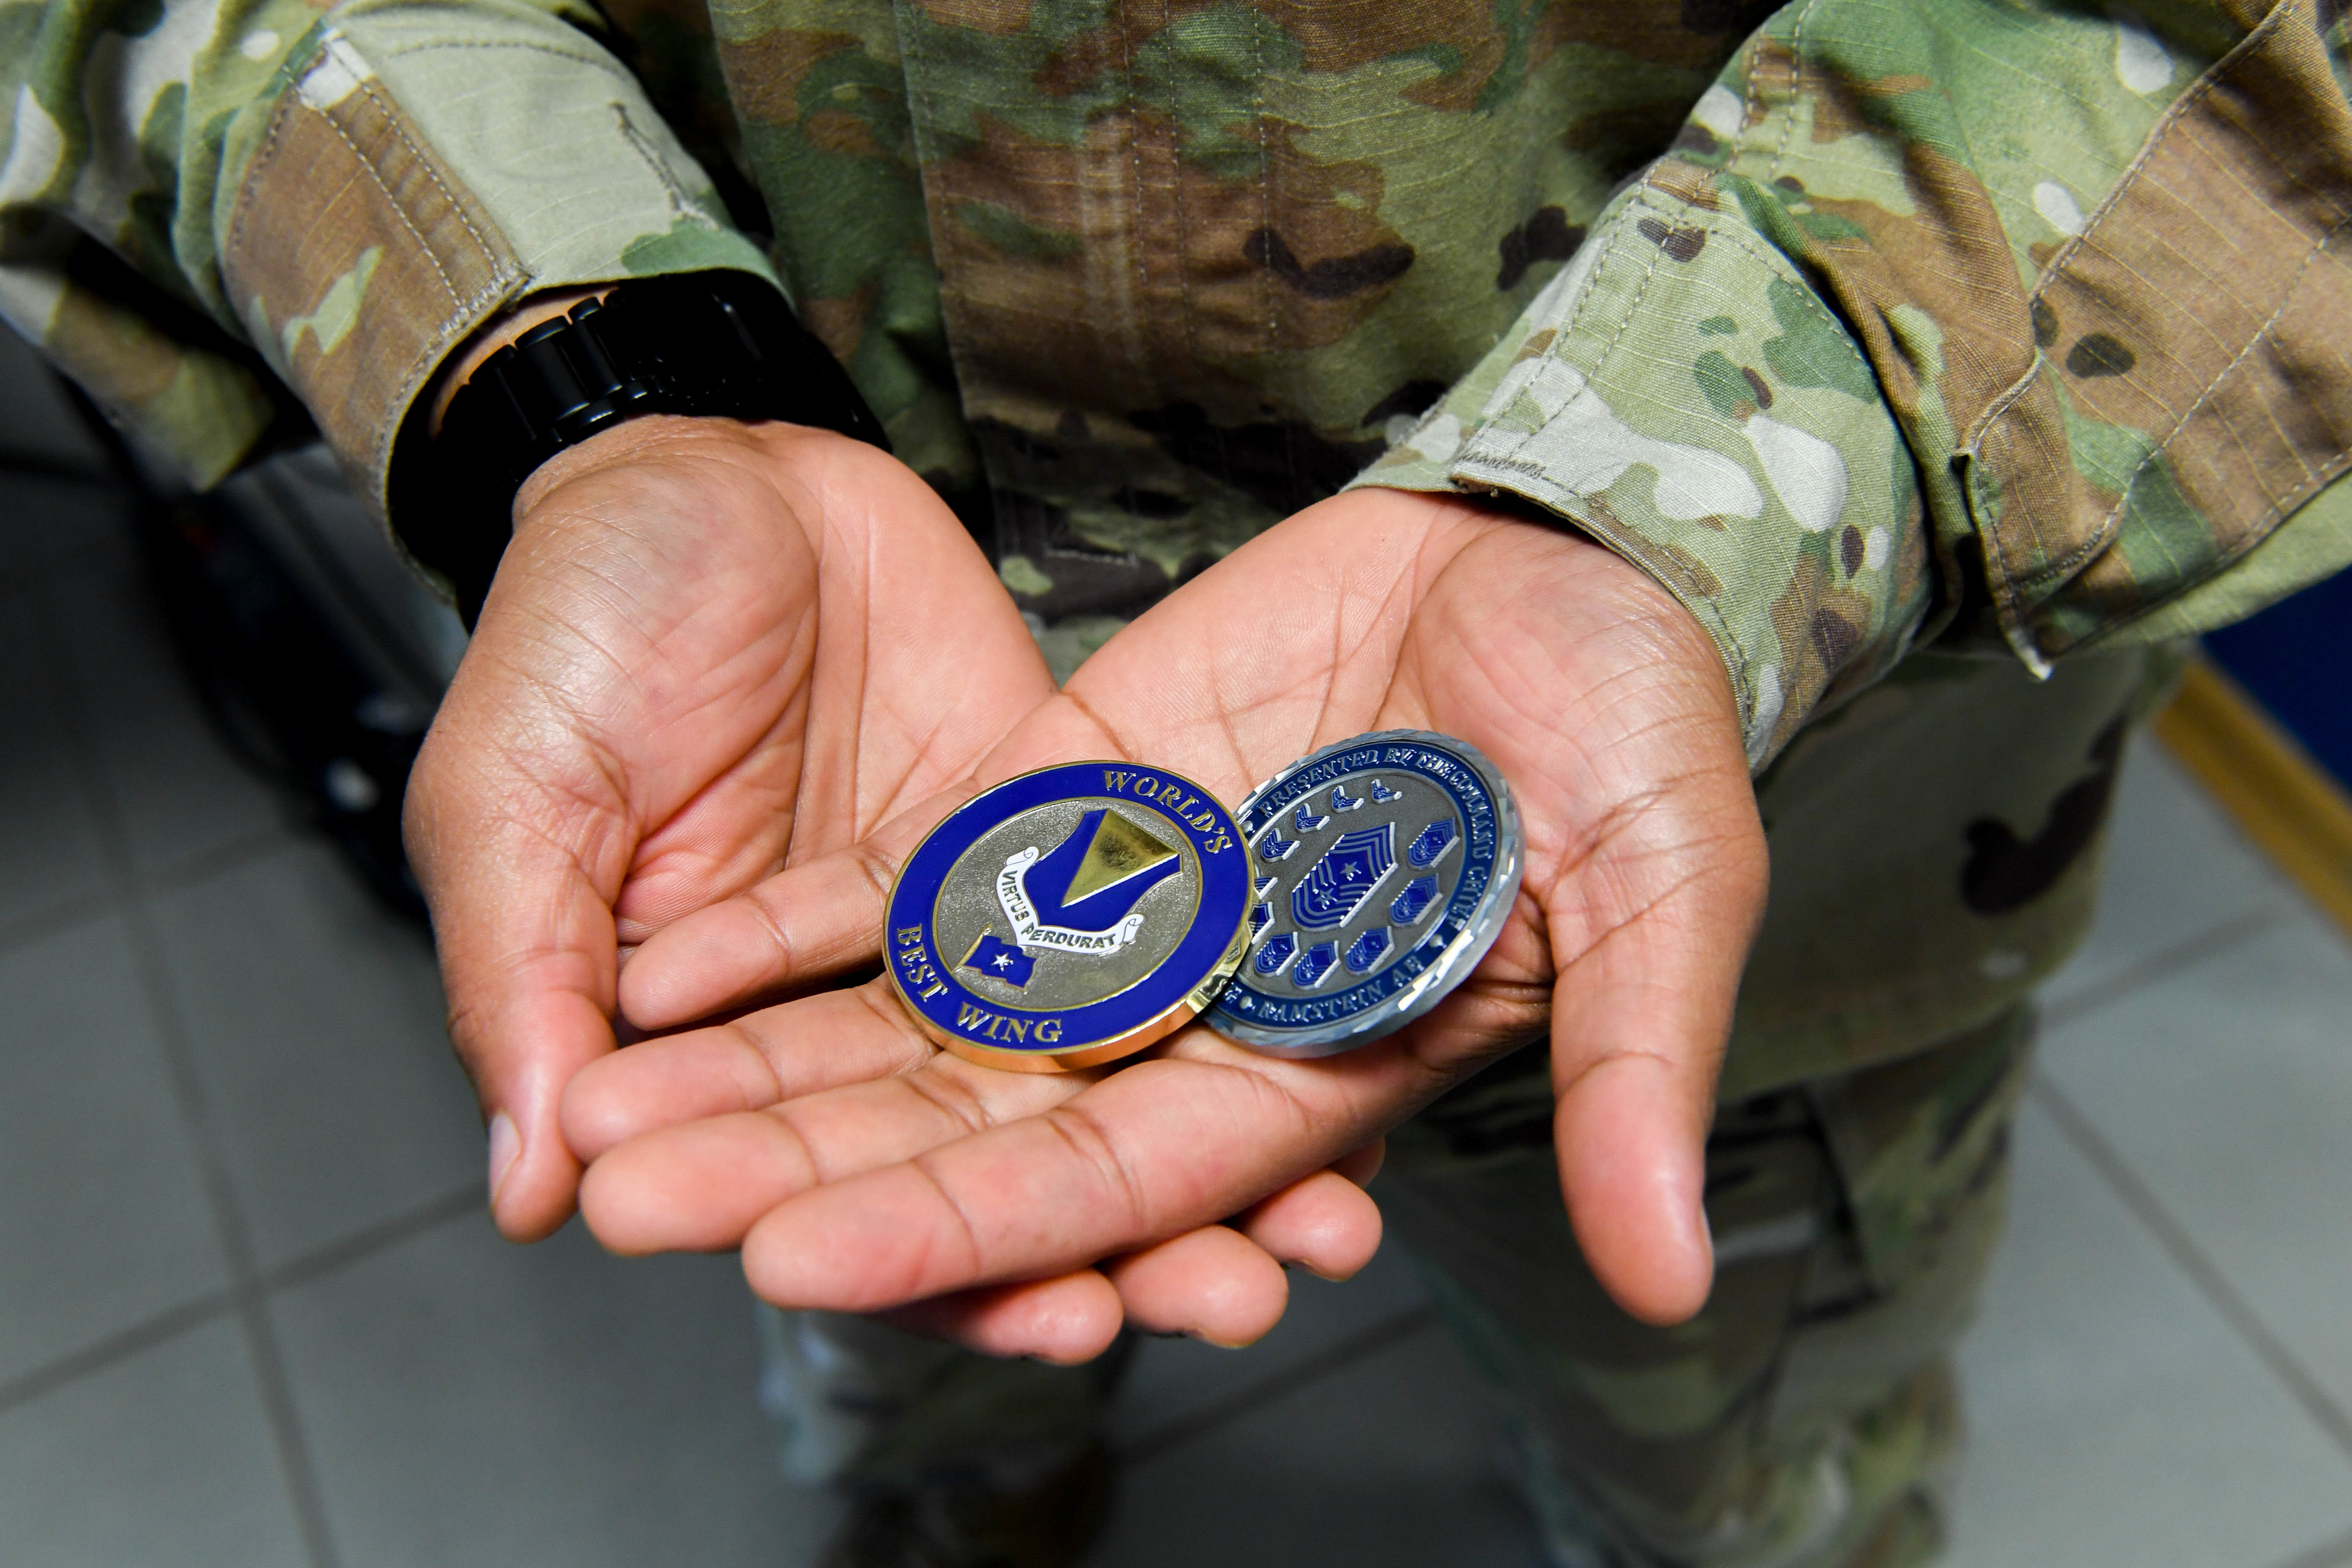 An Airman displaying his Airlifter of the Week coins.